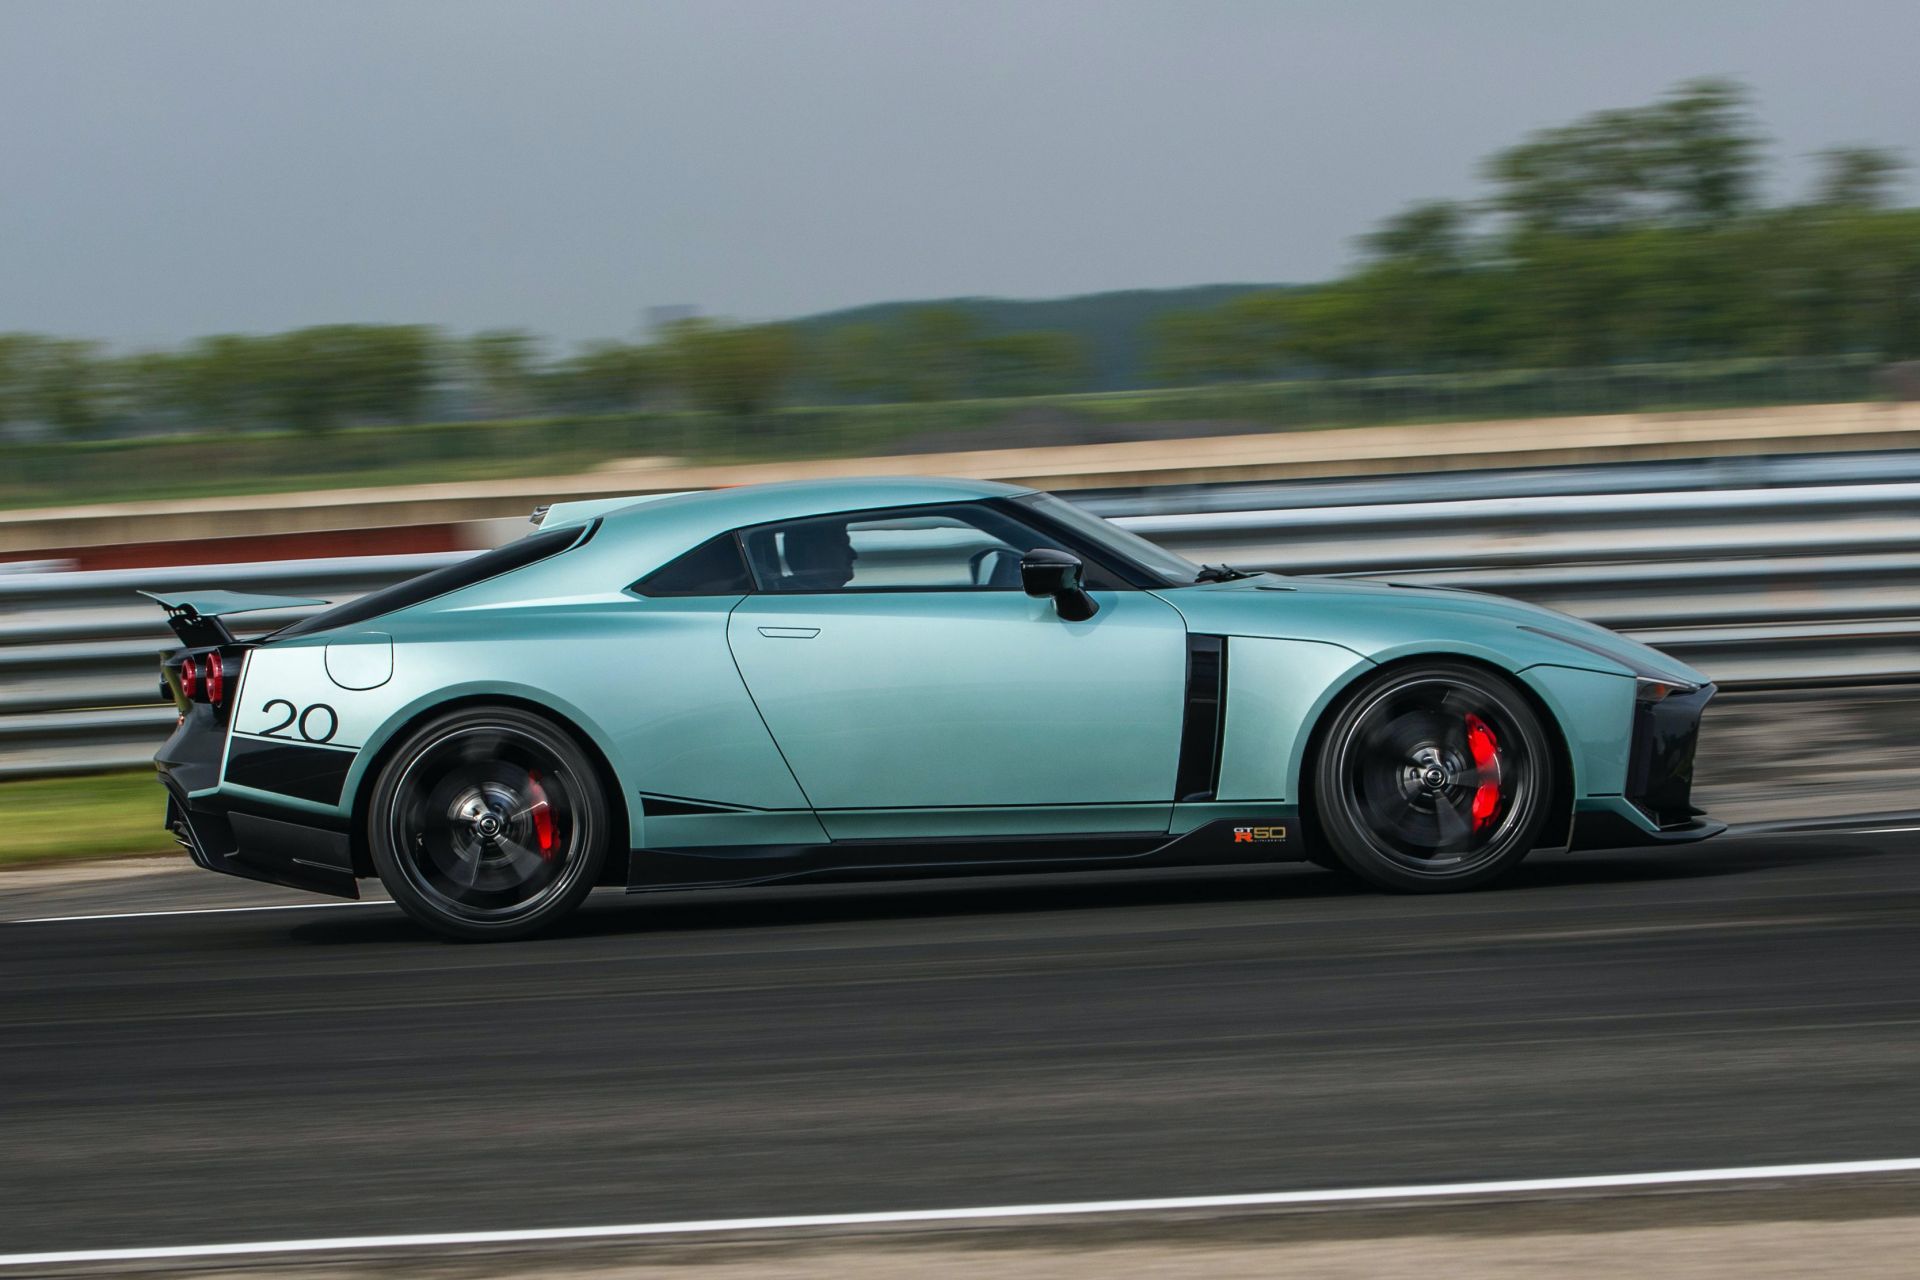 R36 Nissan GT-R May Go Hybrid, Coming 2023 With KERS - autoevolution